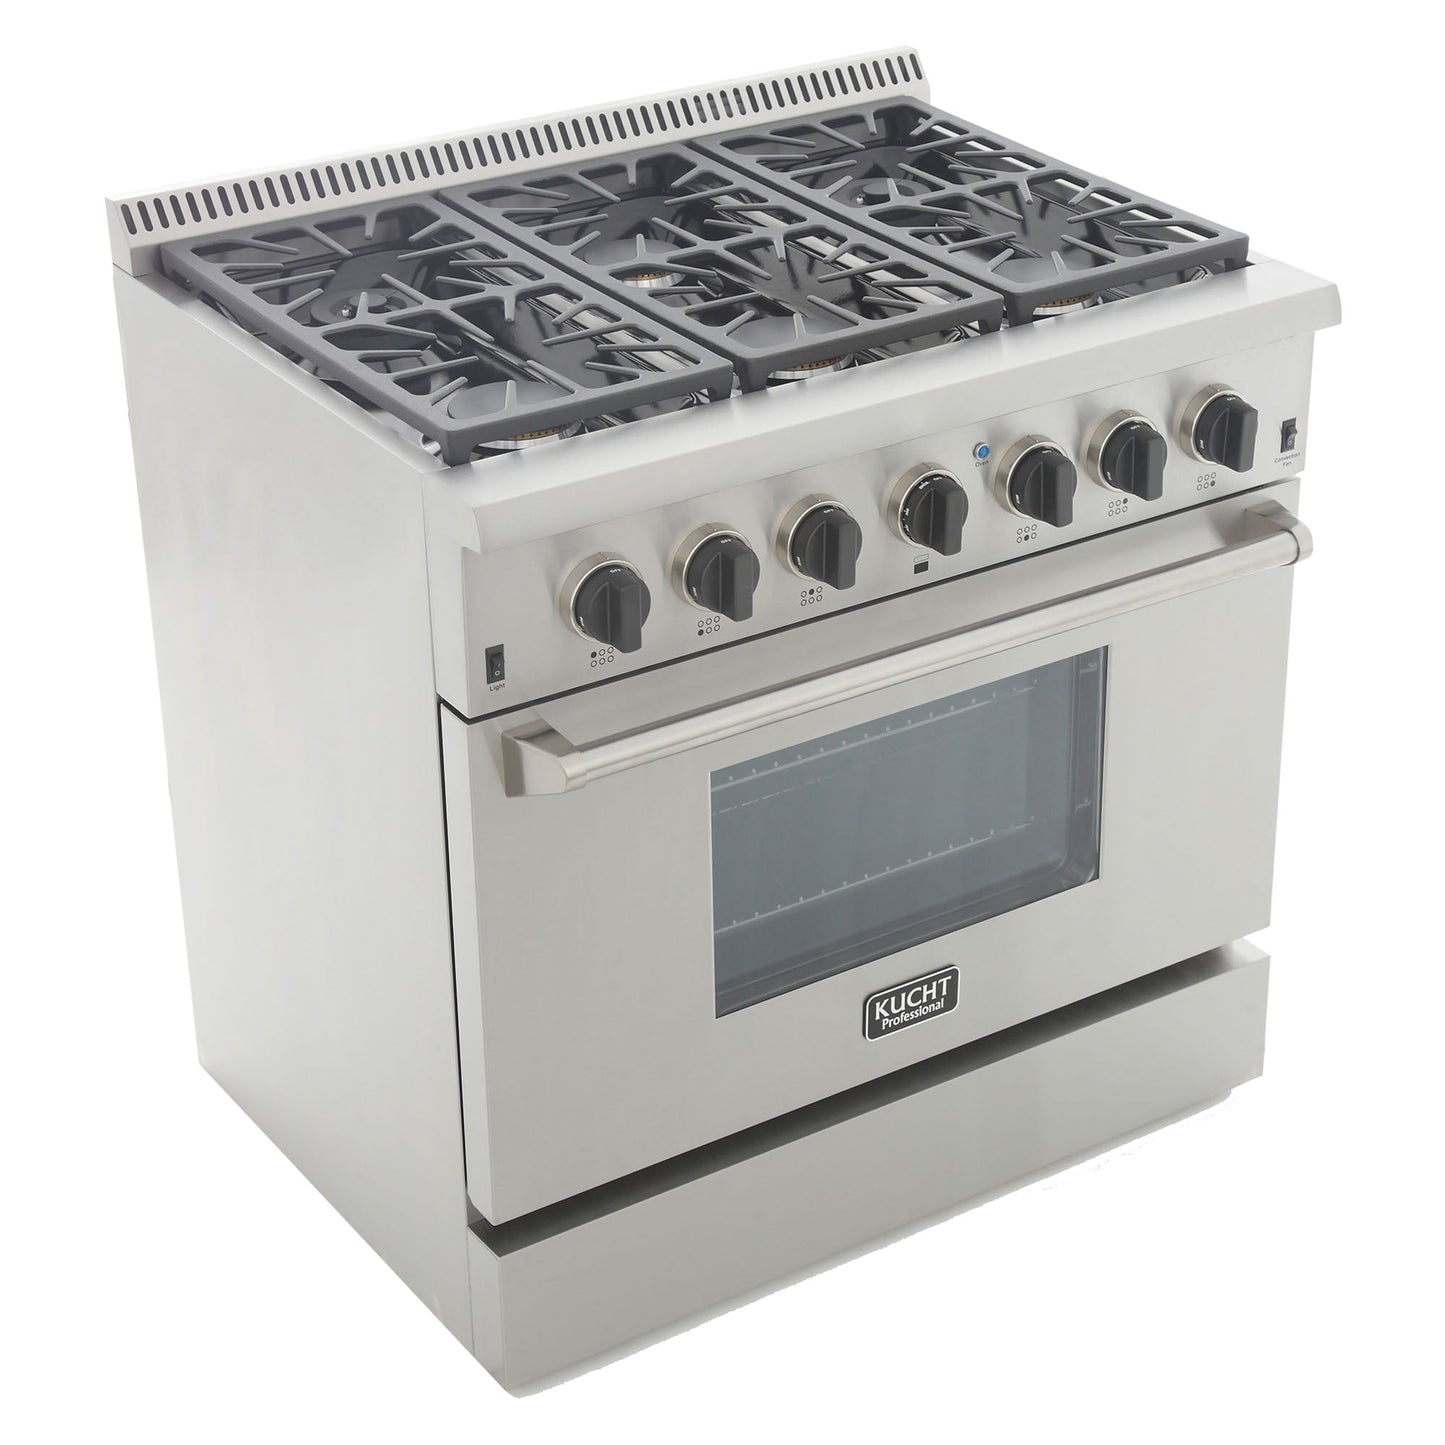 Kucht KRD Series 36" Freestanding Natural Gas Dual Fuel Range With 6 Burners and Tuxedo Black Knobs